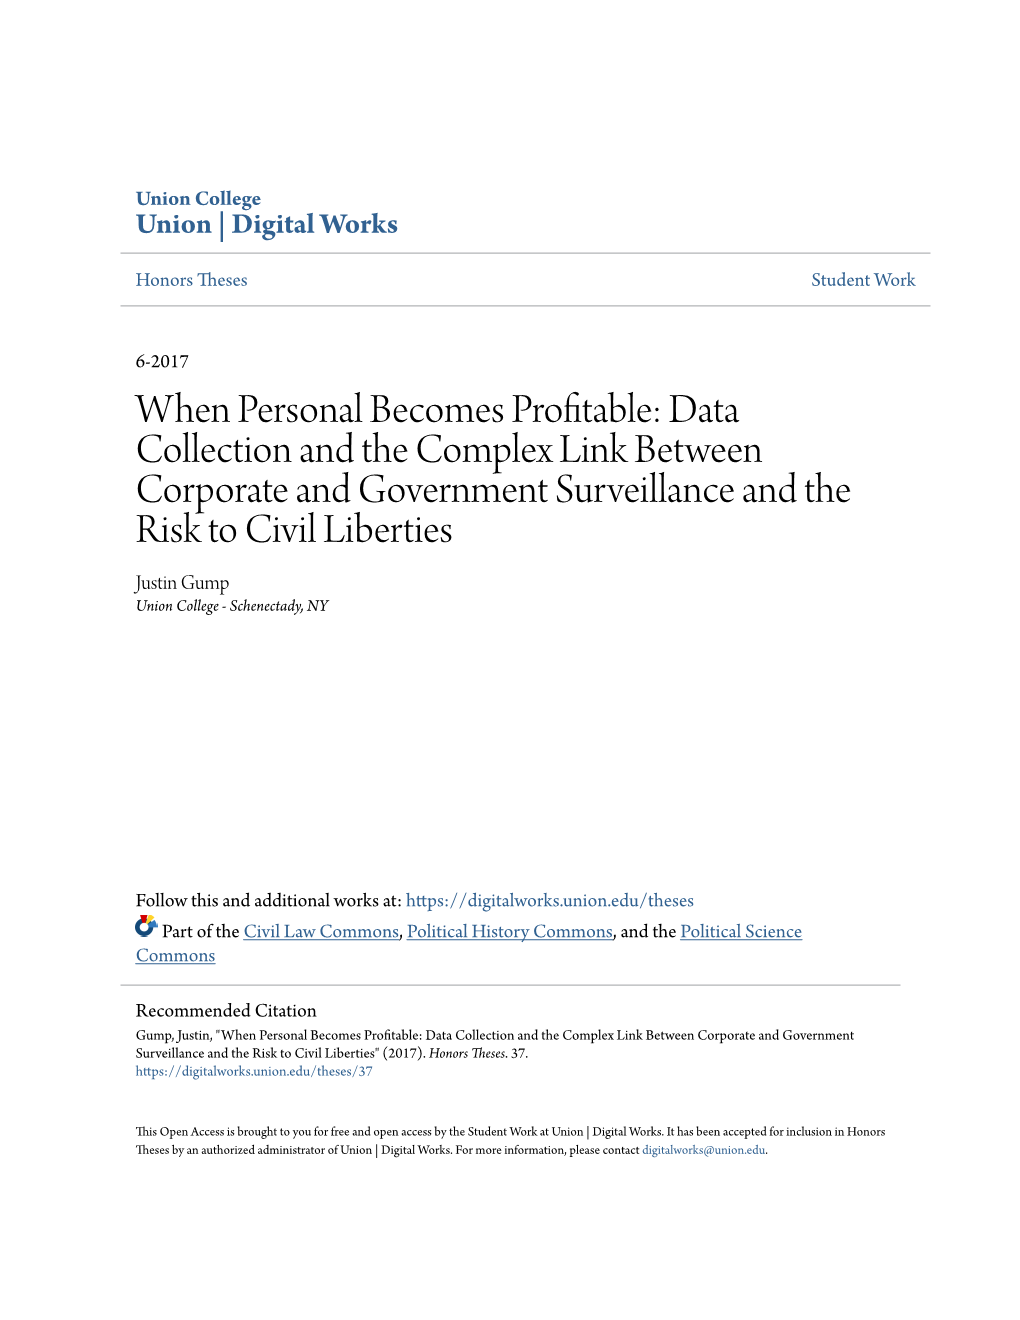 When Personal Becomes Profitable: Data Collection and the Complex Link Between Corporate and Government Surveillance and The